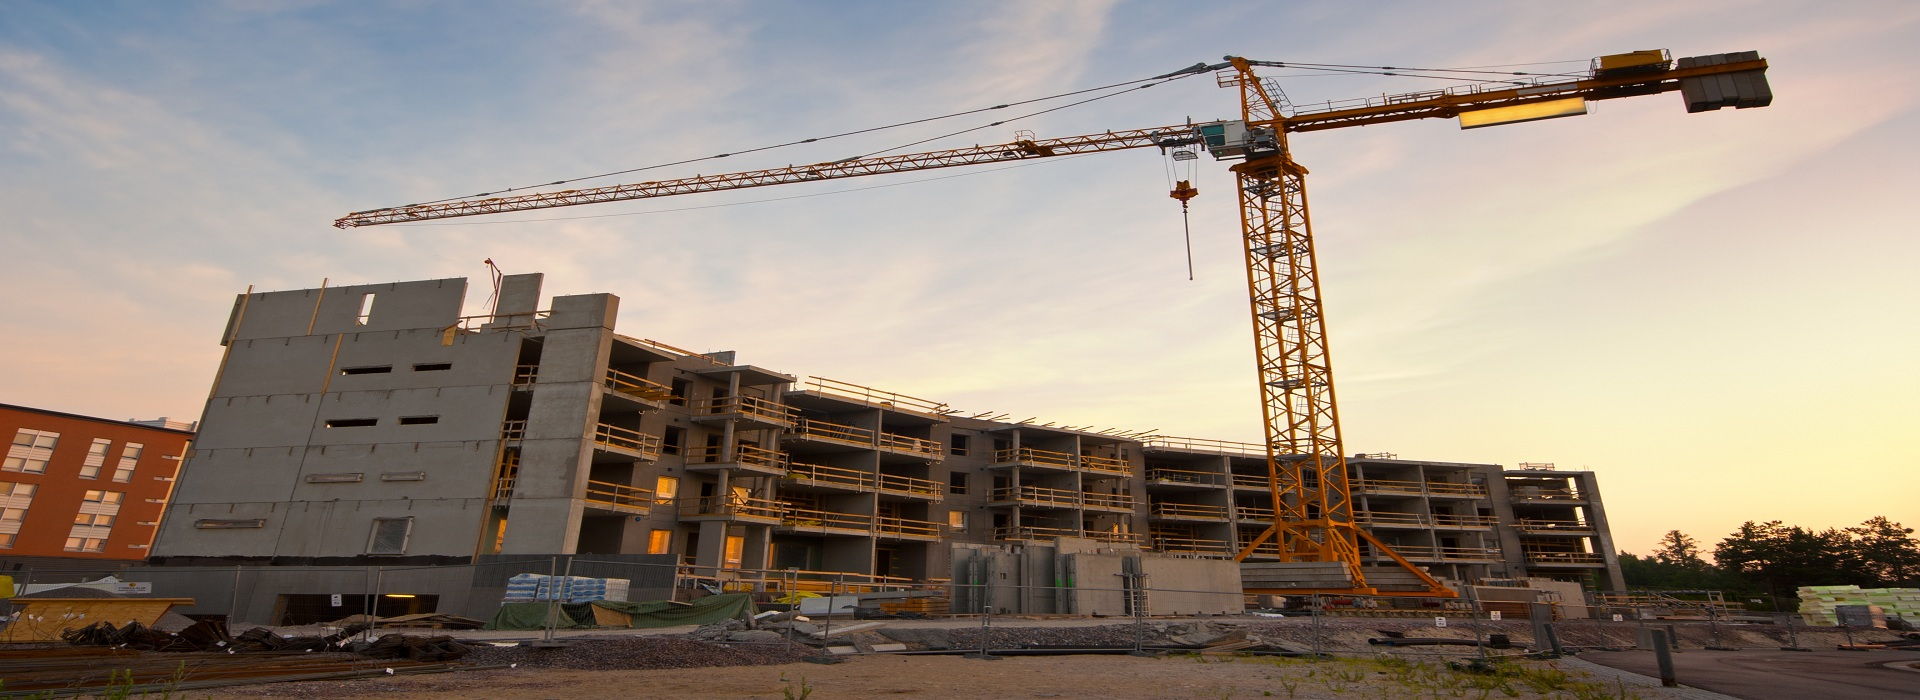 How to Choose the Best Construction and Development Company